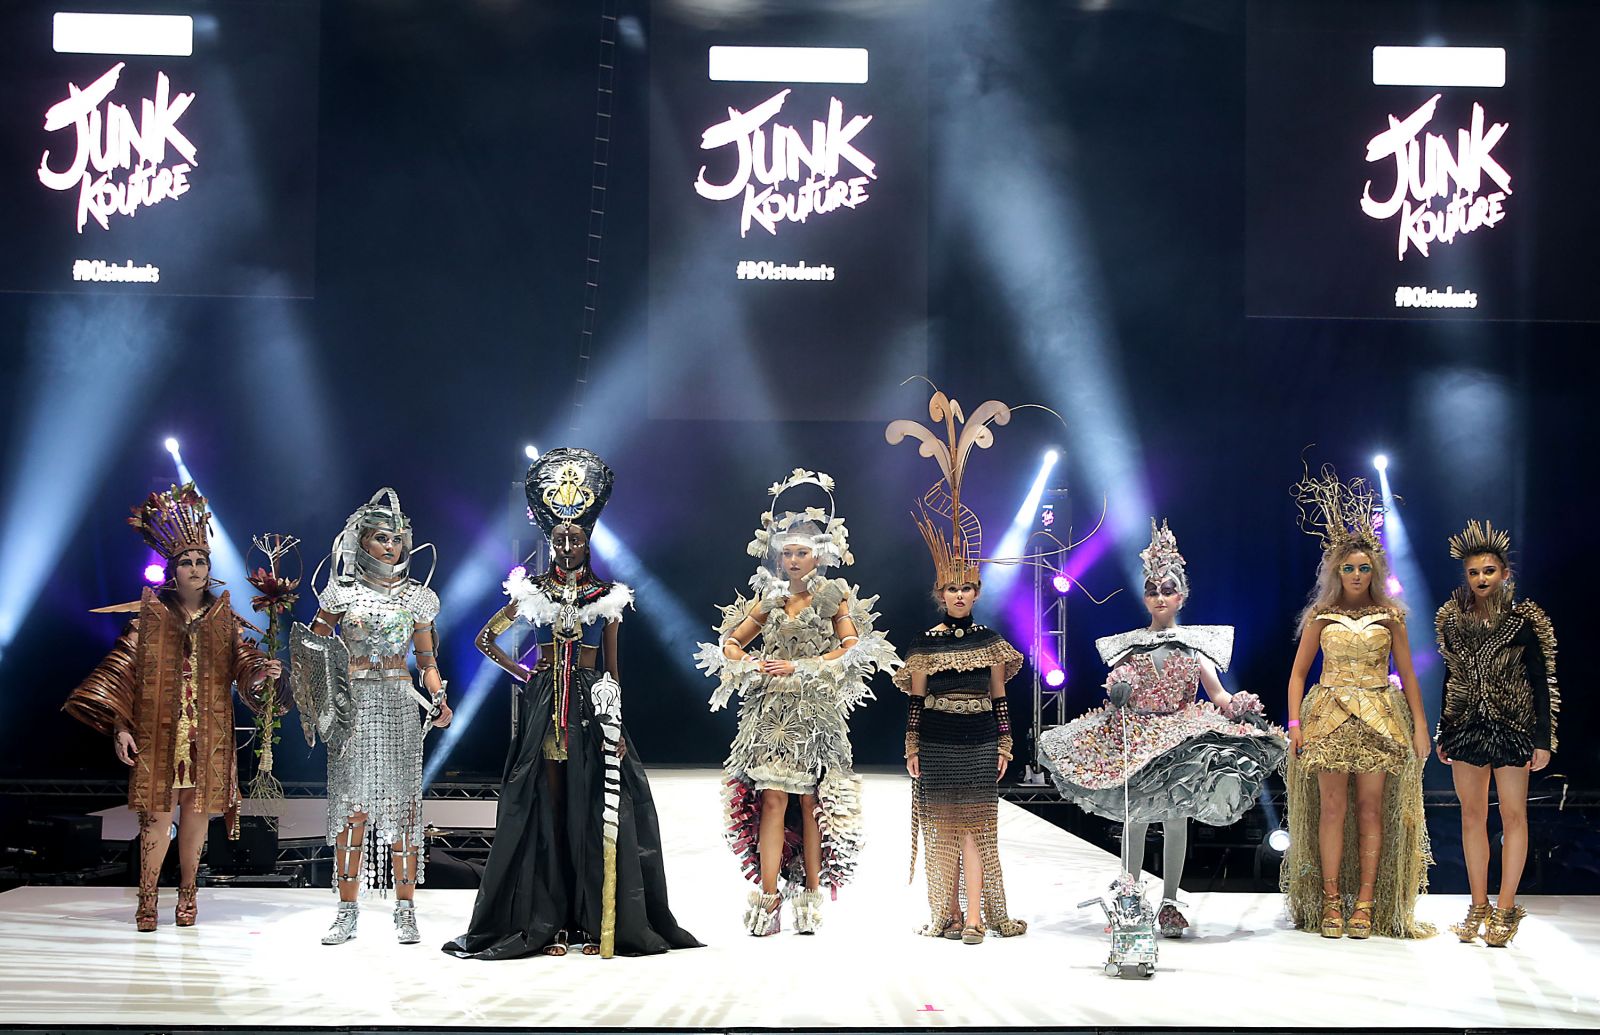 Bank of Ireland Junk Kouture 2016 Northern Region runners up include designs from St. Mary’s High School, Newry & Holy Trinity School, Cookstown